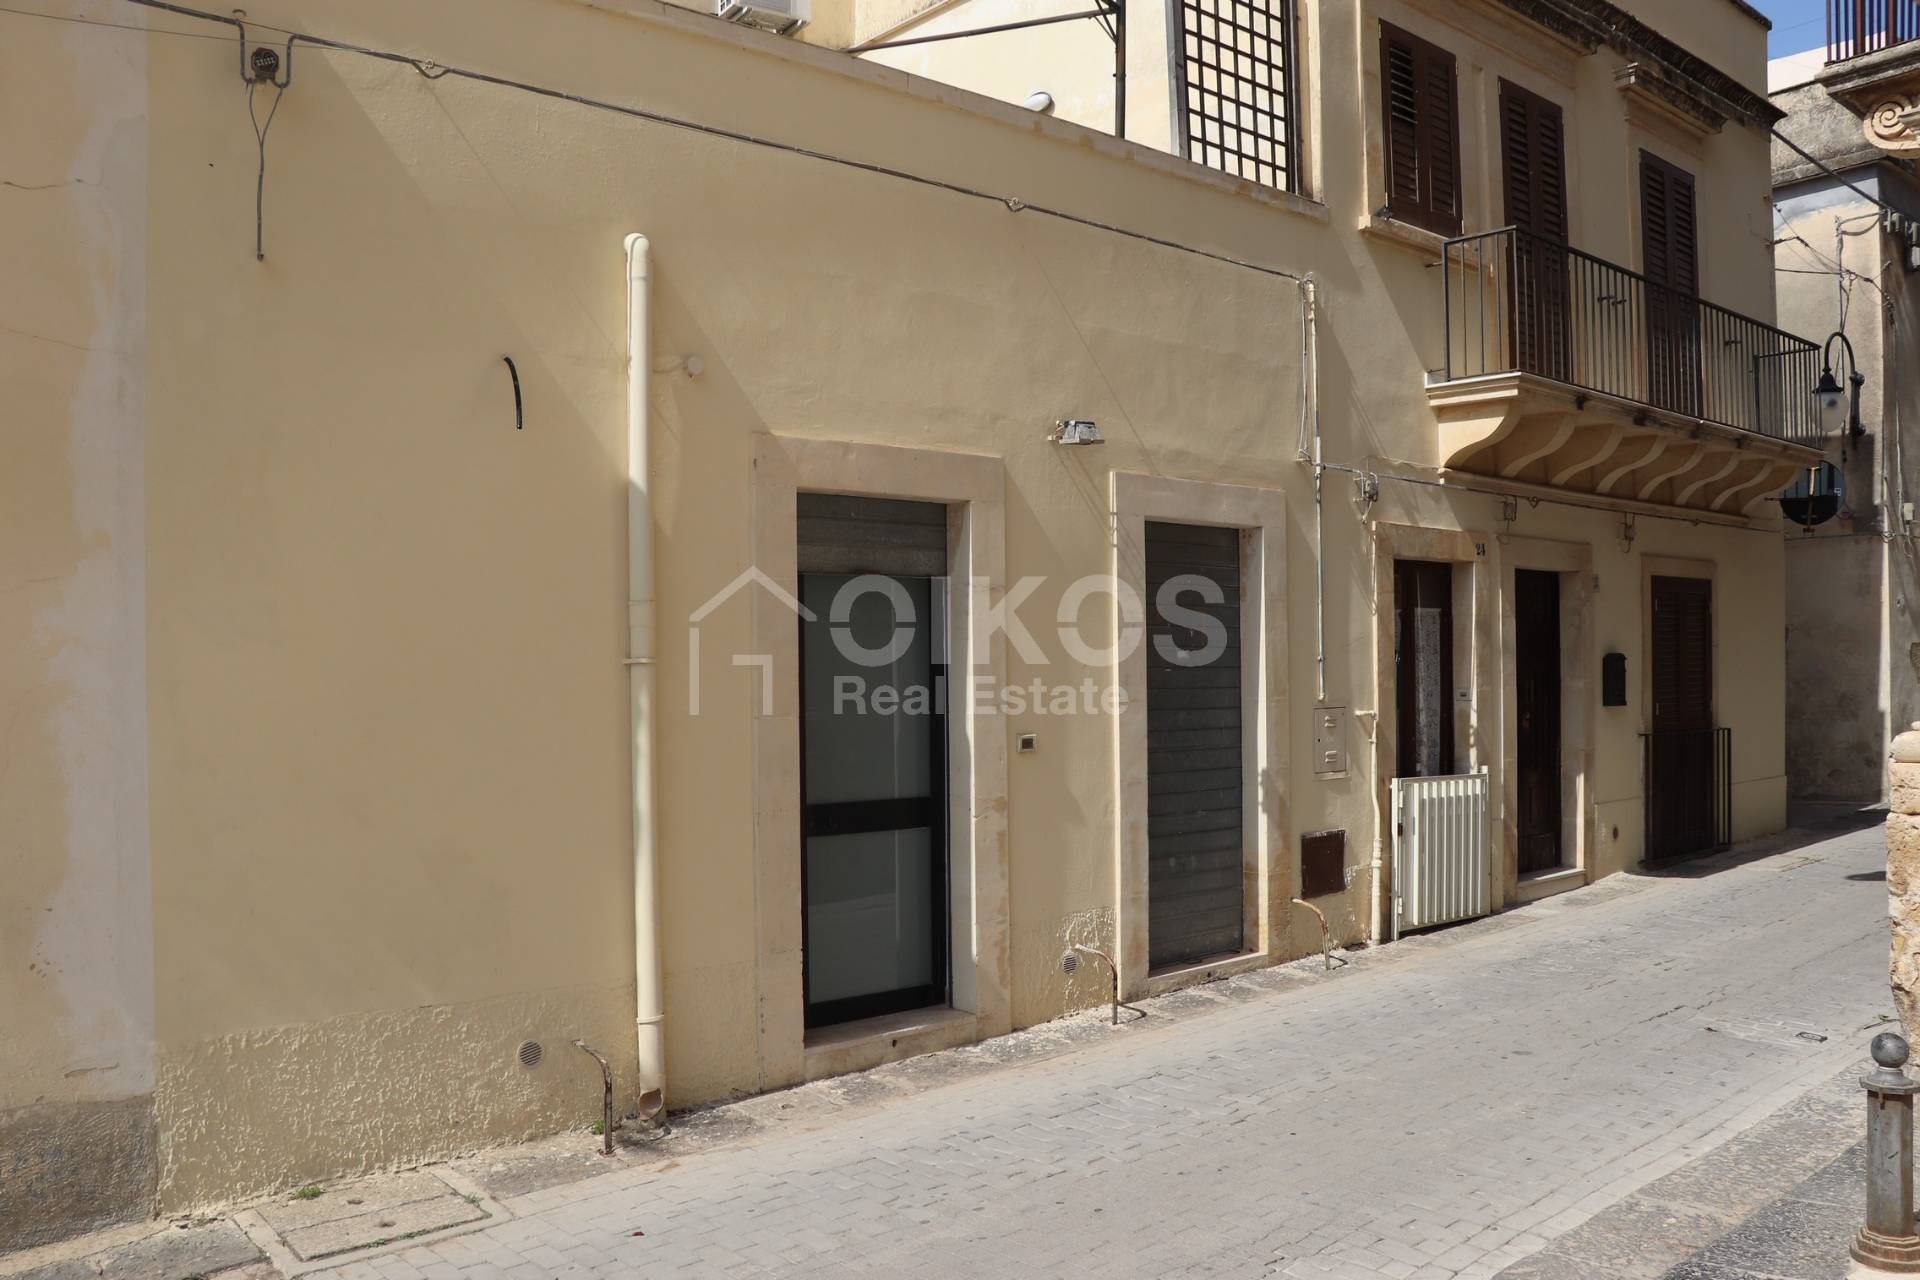 Locale commerciale in affitto a Noto